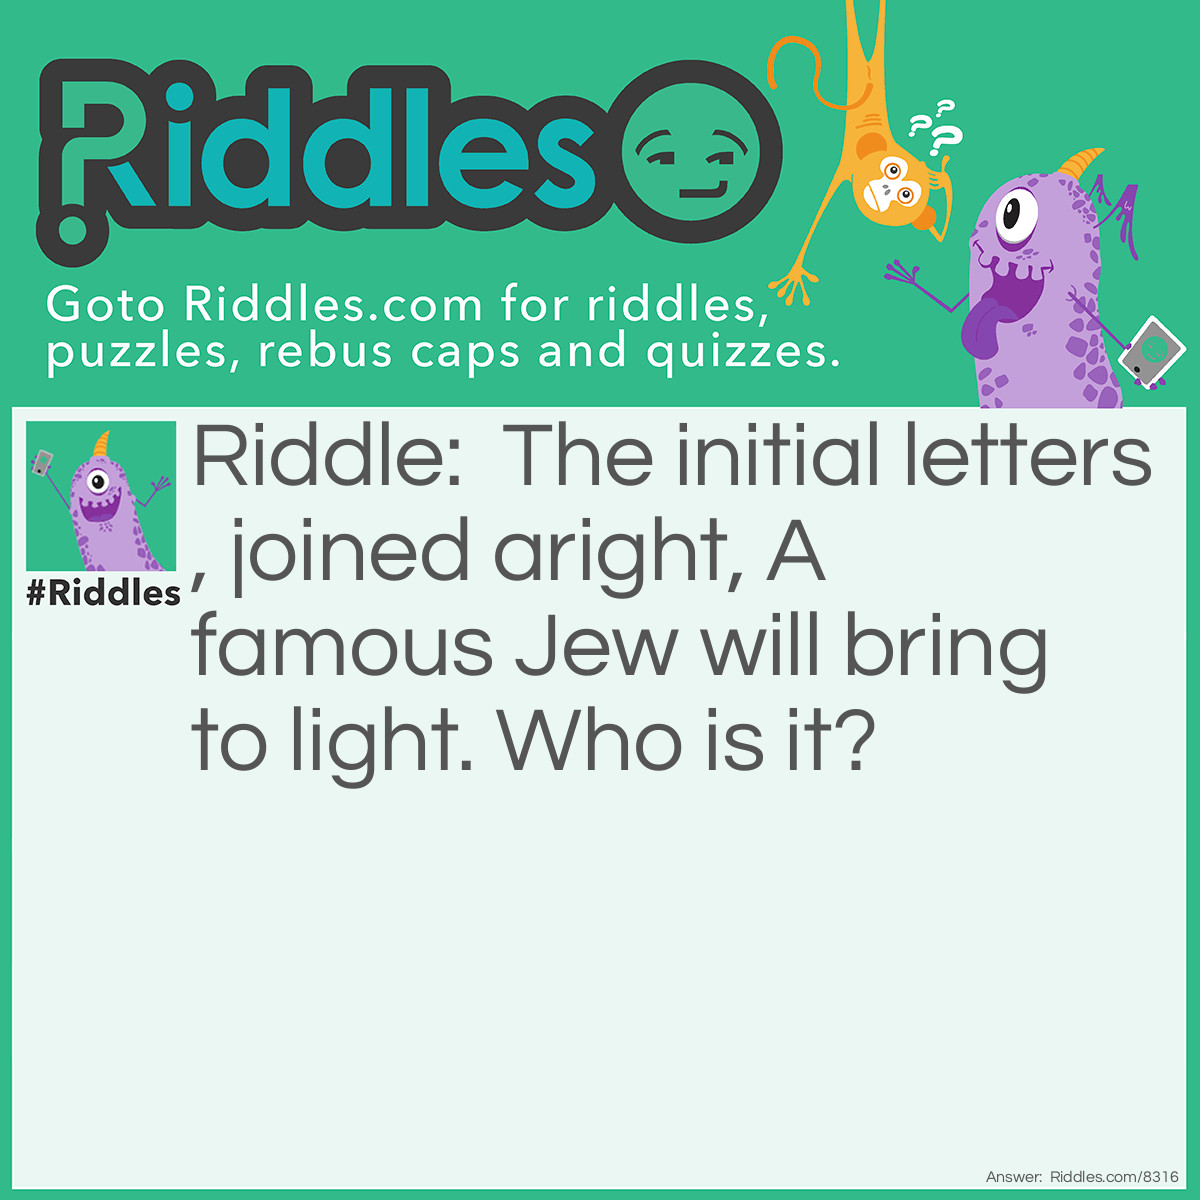 Riddle: The initial letters joined aright, A famous Jew will bring to light. Who is it? Answer: Joshua.